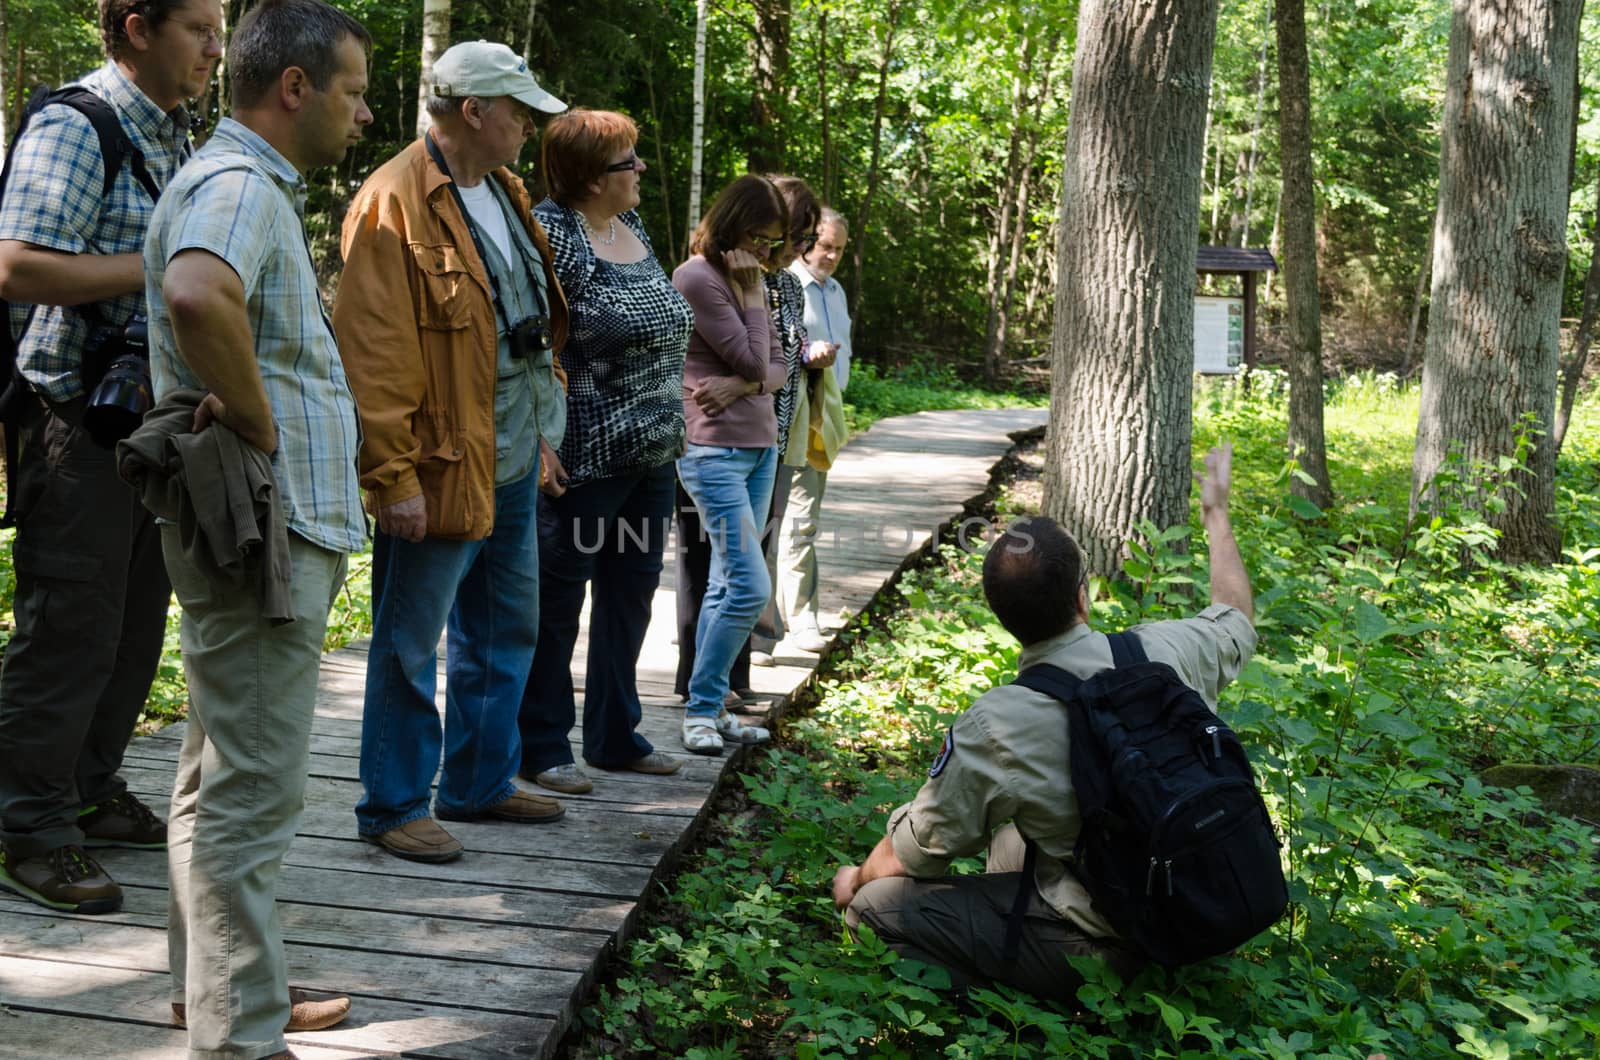 DUKSTOS, LITHUANIA - JUNE 18: group of elderly tourists in forest listen to park leader guide story about plants on June 18, 2013 in Dukstos, Lithuania.